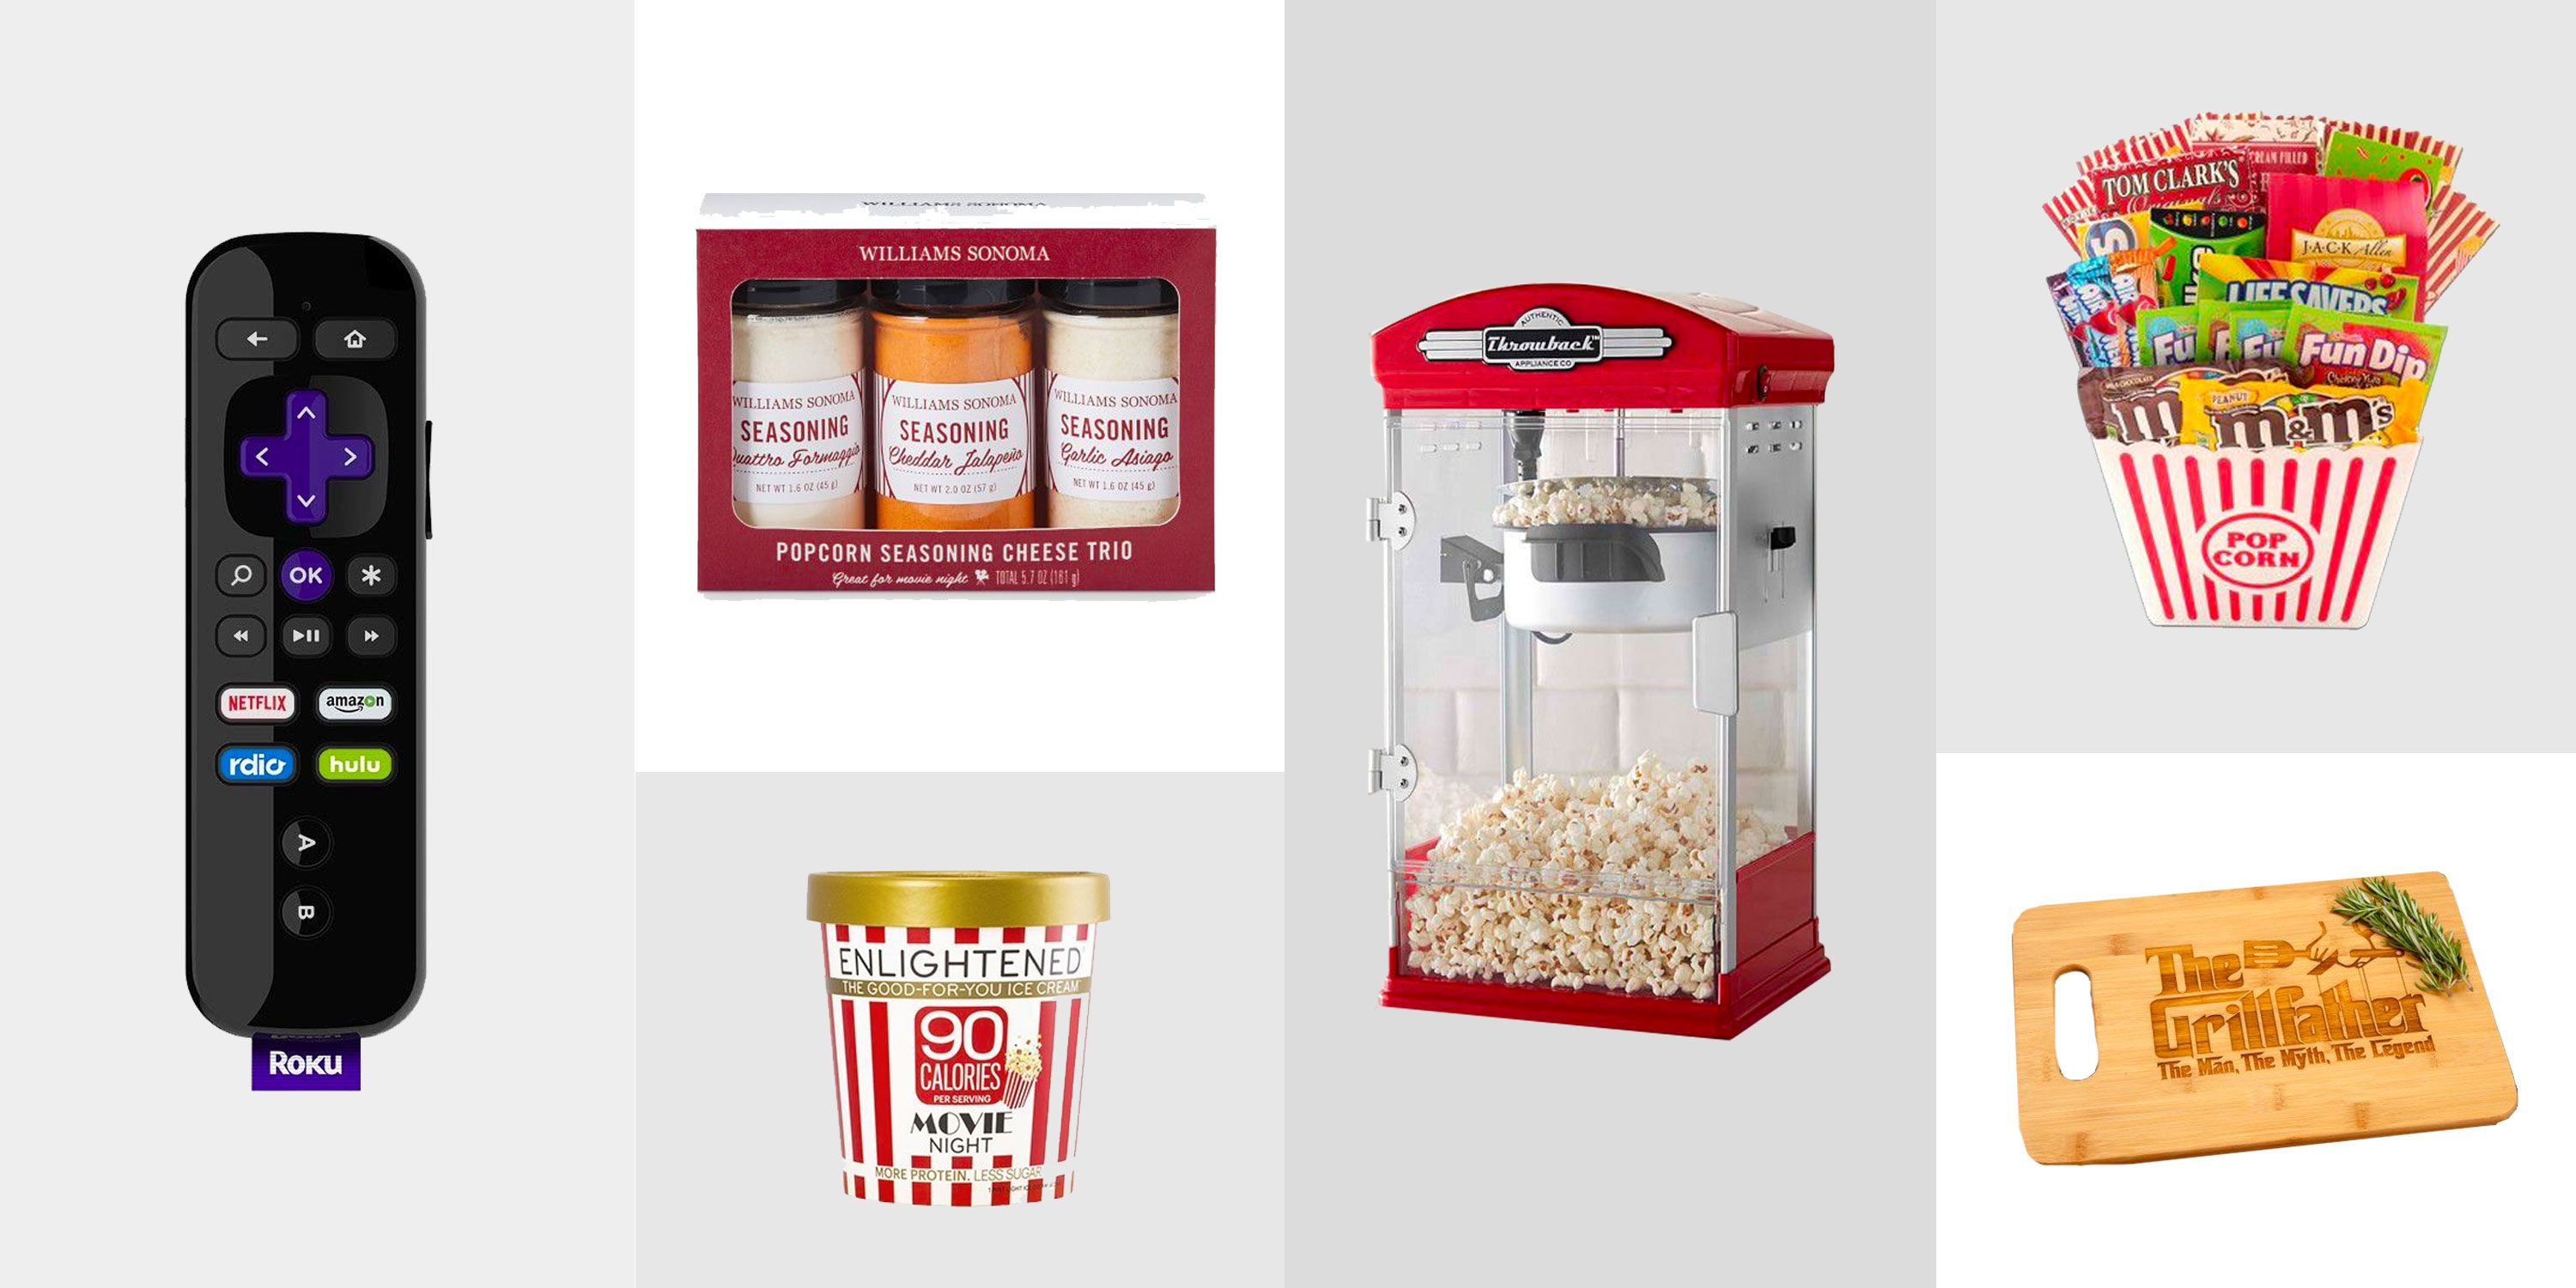 40 Best Gifts for Movie Lovers 2021 - Fun Gift Ideas for Movie Fans